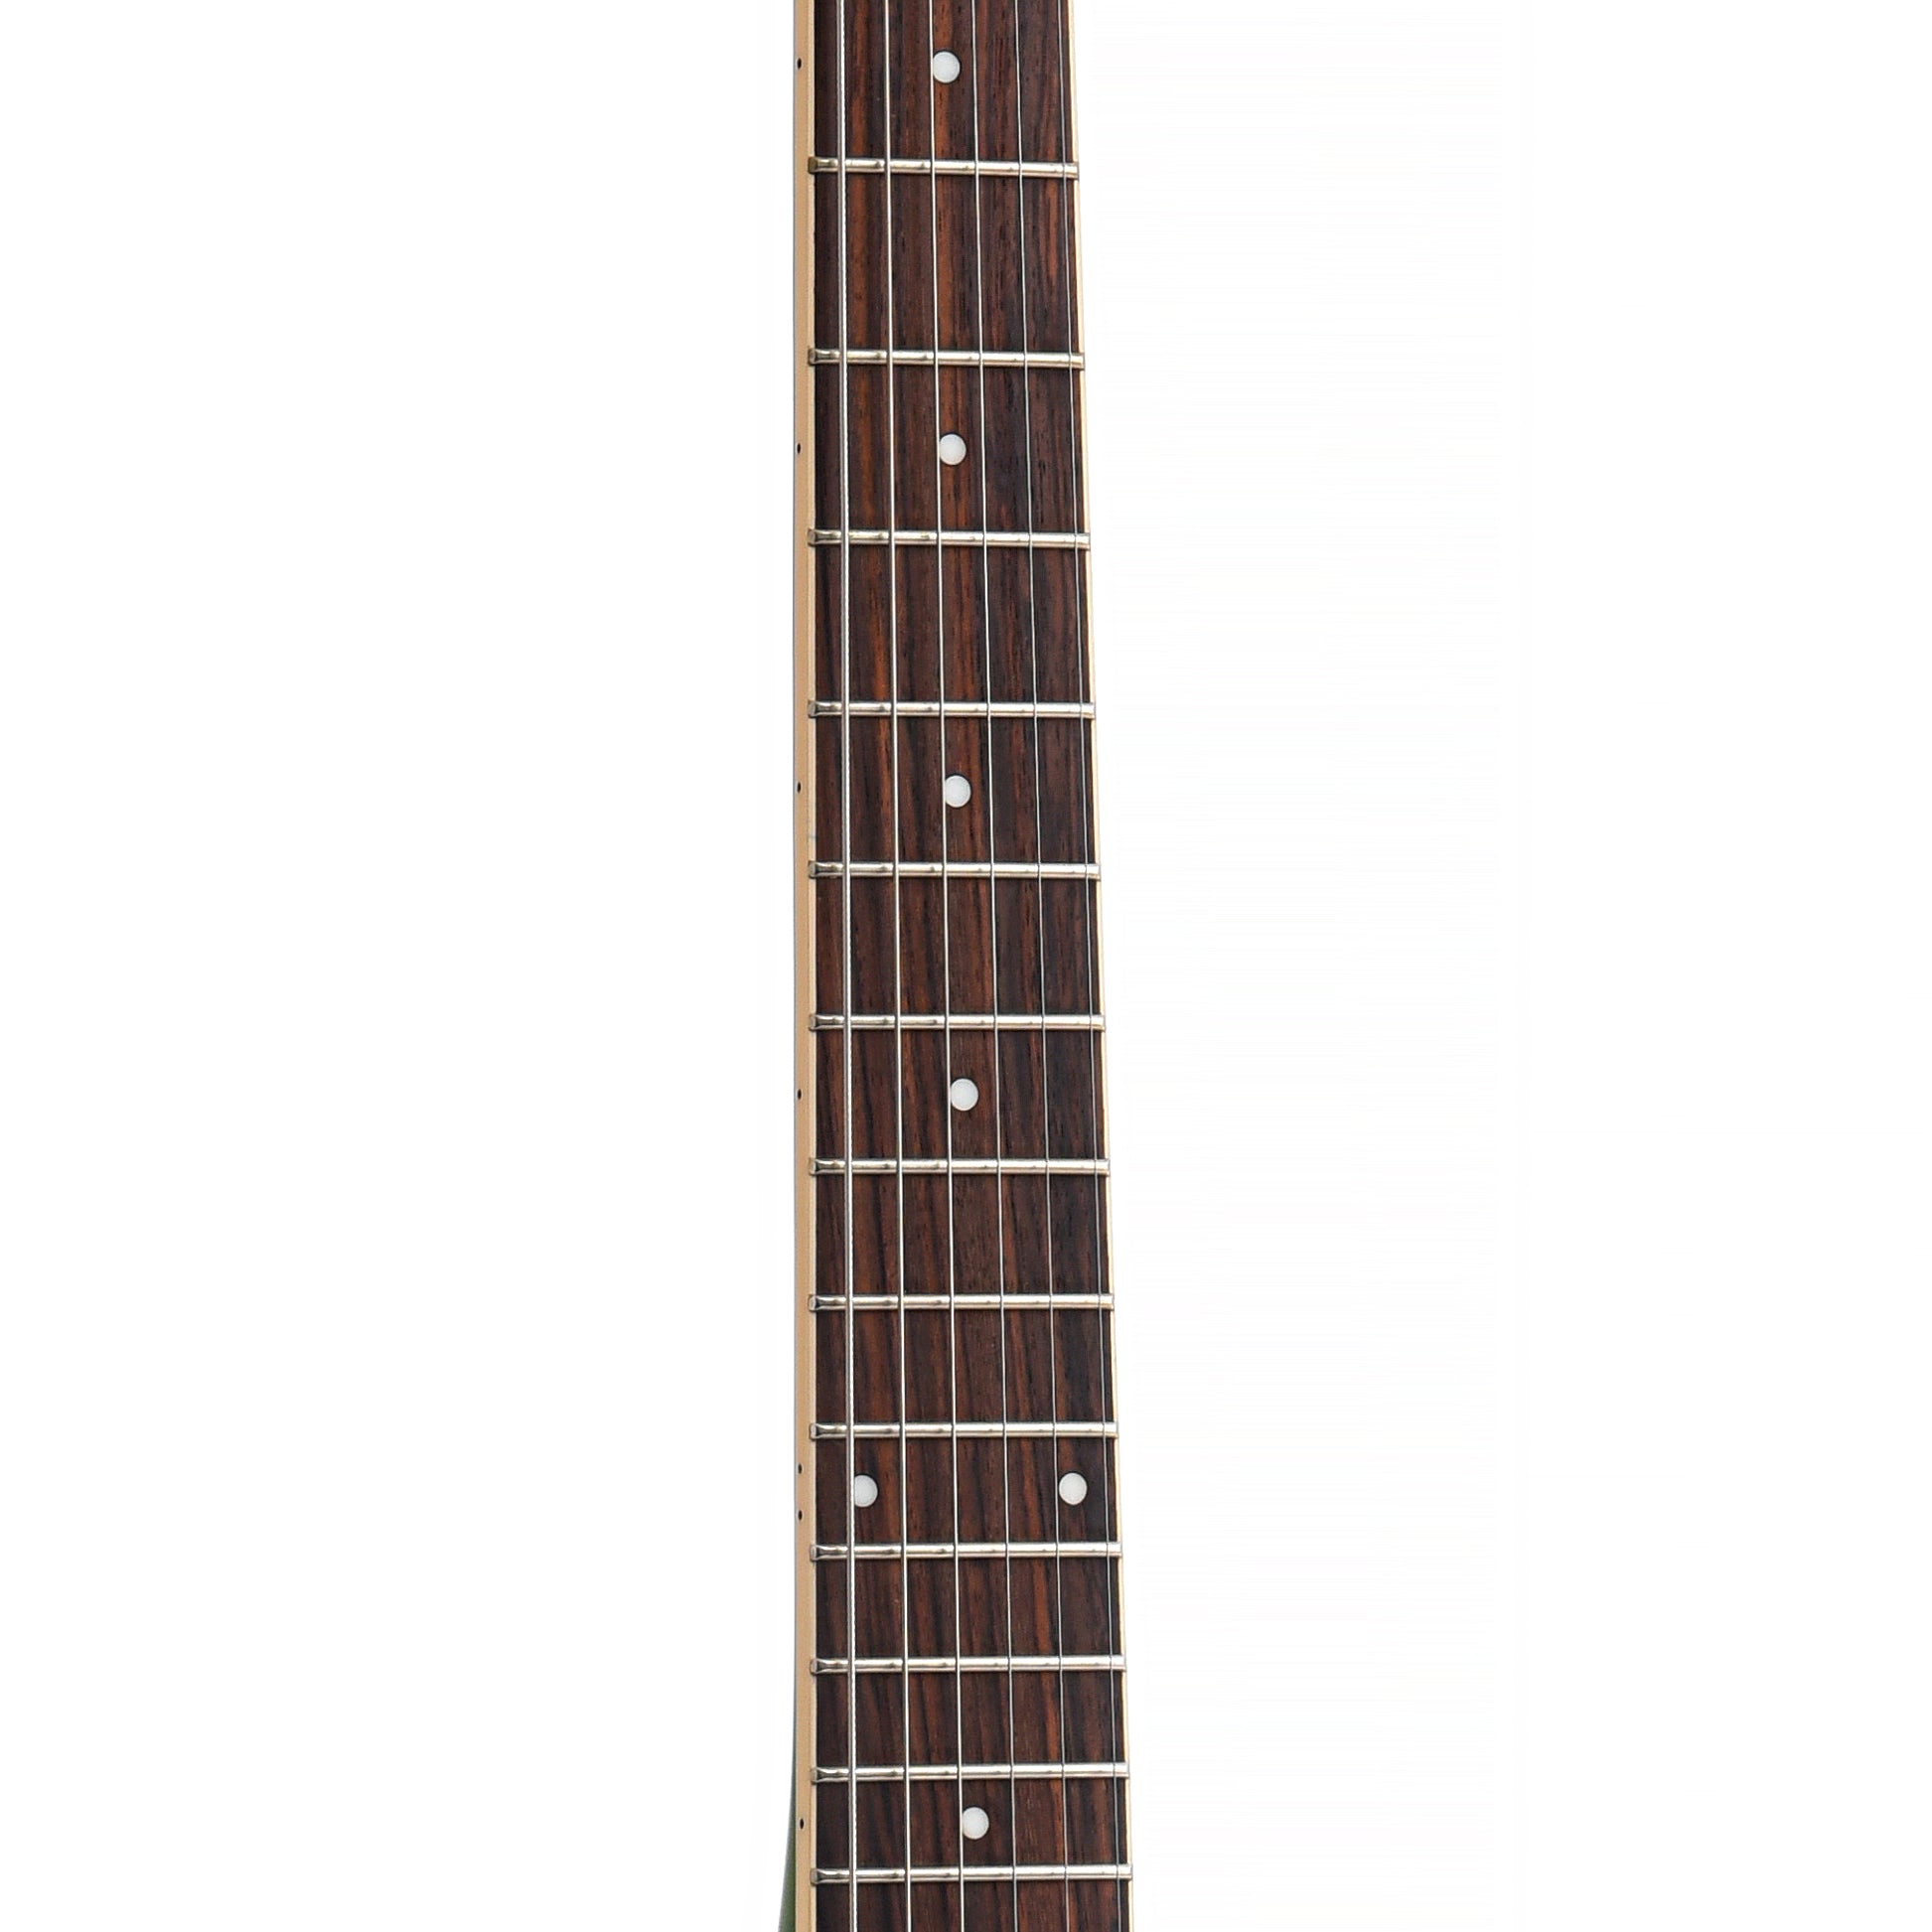 Image 5 of Guild Starfire I Double Cutaway Semi-Hollow Body Guitar with Vibrato, Emerald Green - SKU# GSF1DCV-GRN : Product Type Hollow Body Electric Guitars : Elderly Instruments